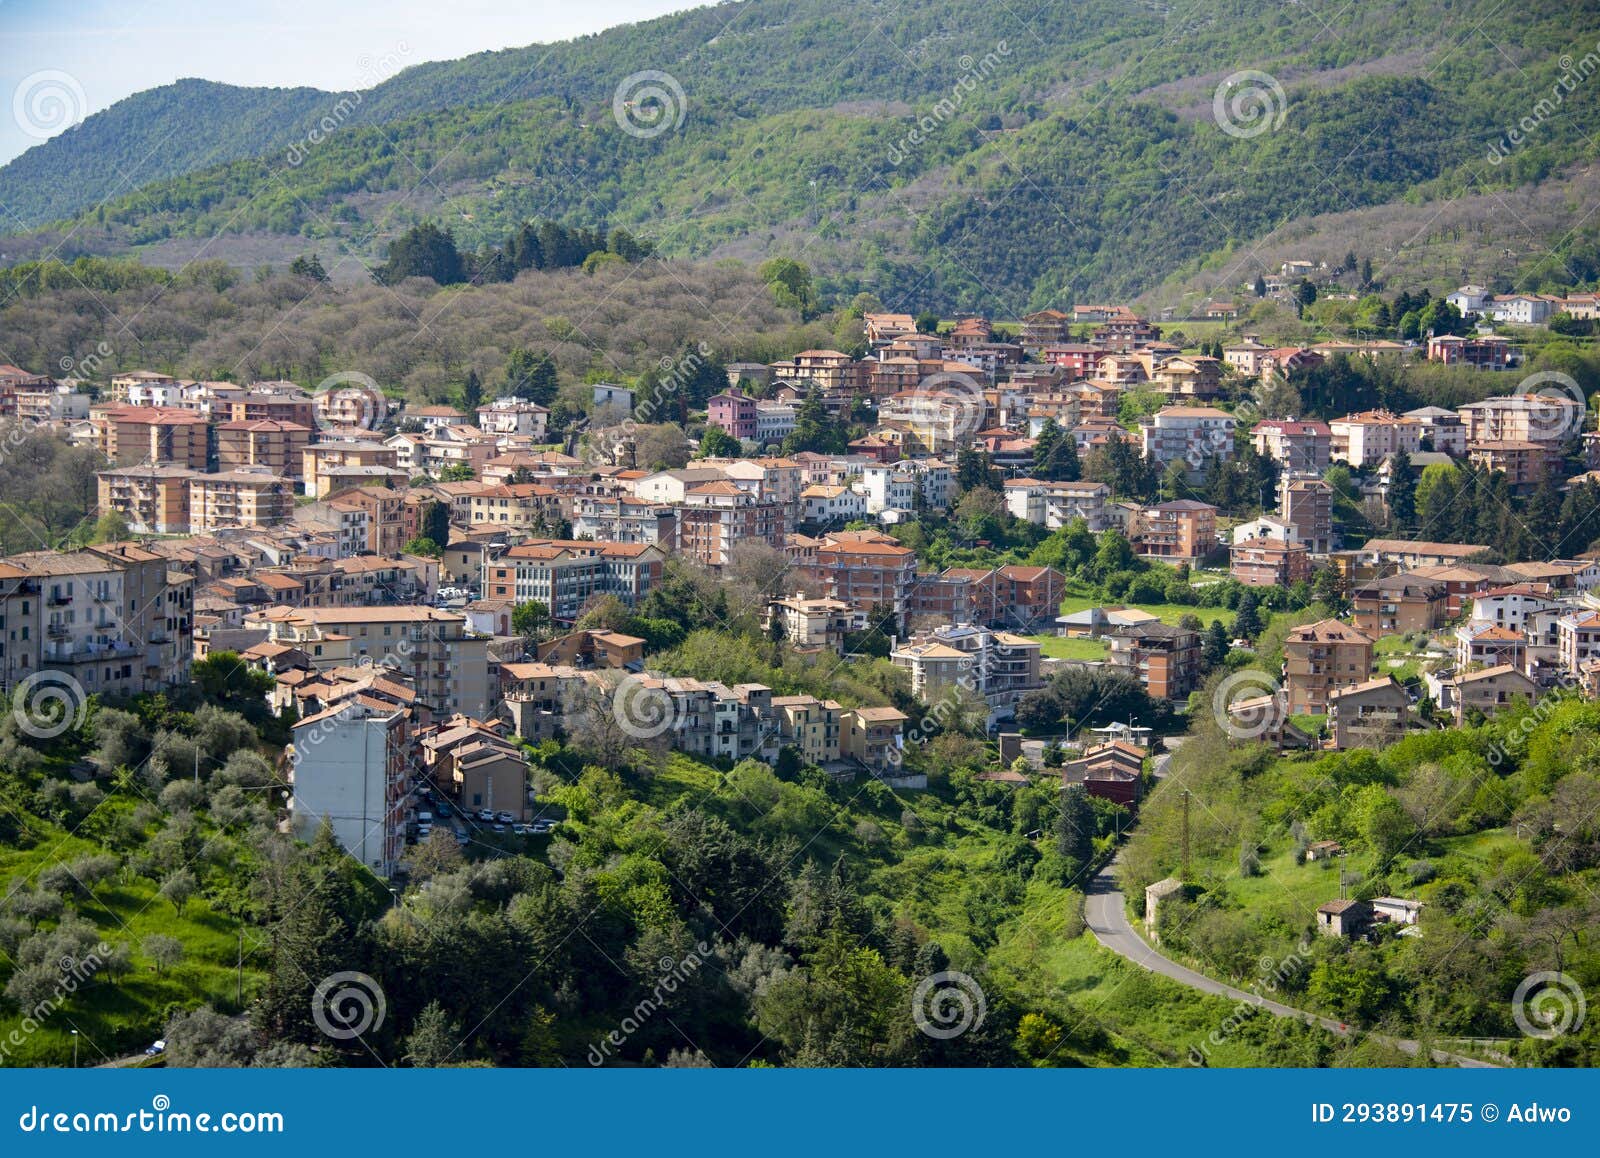 town of segni